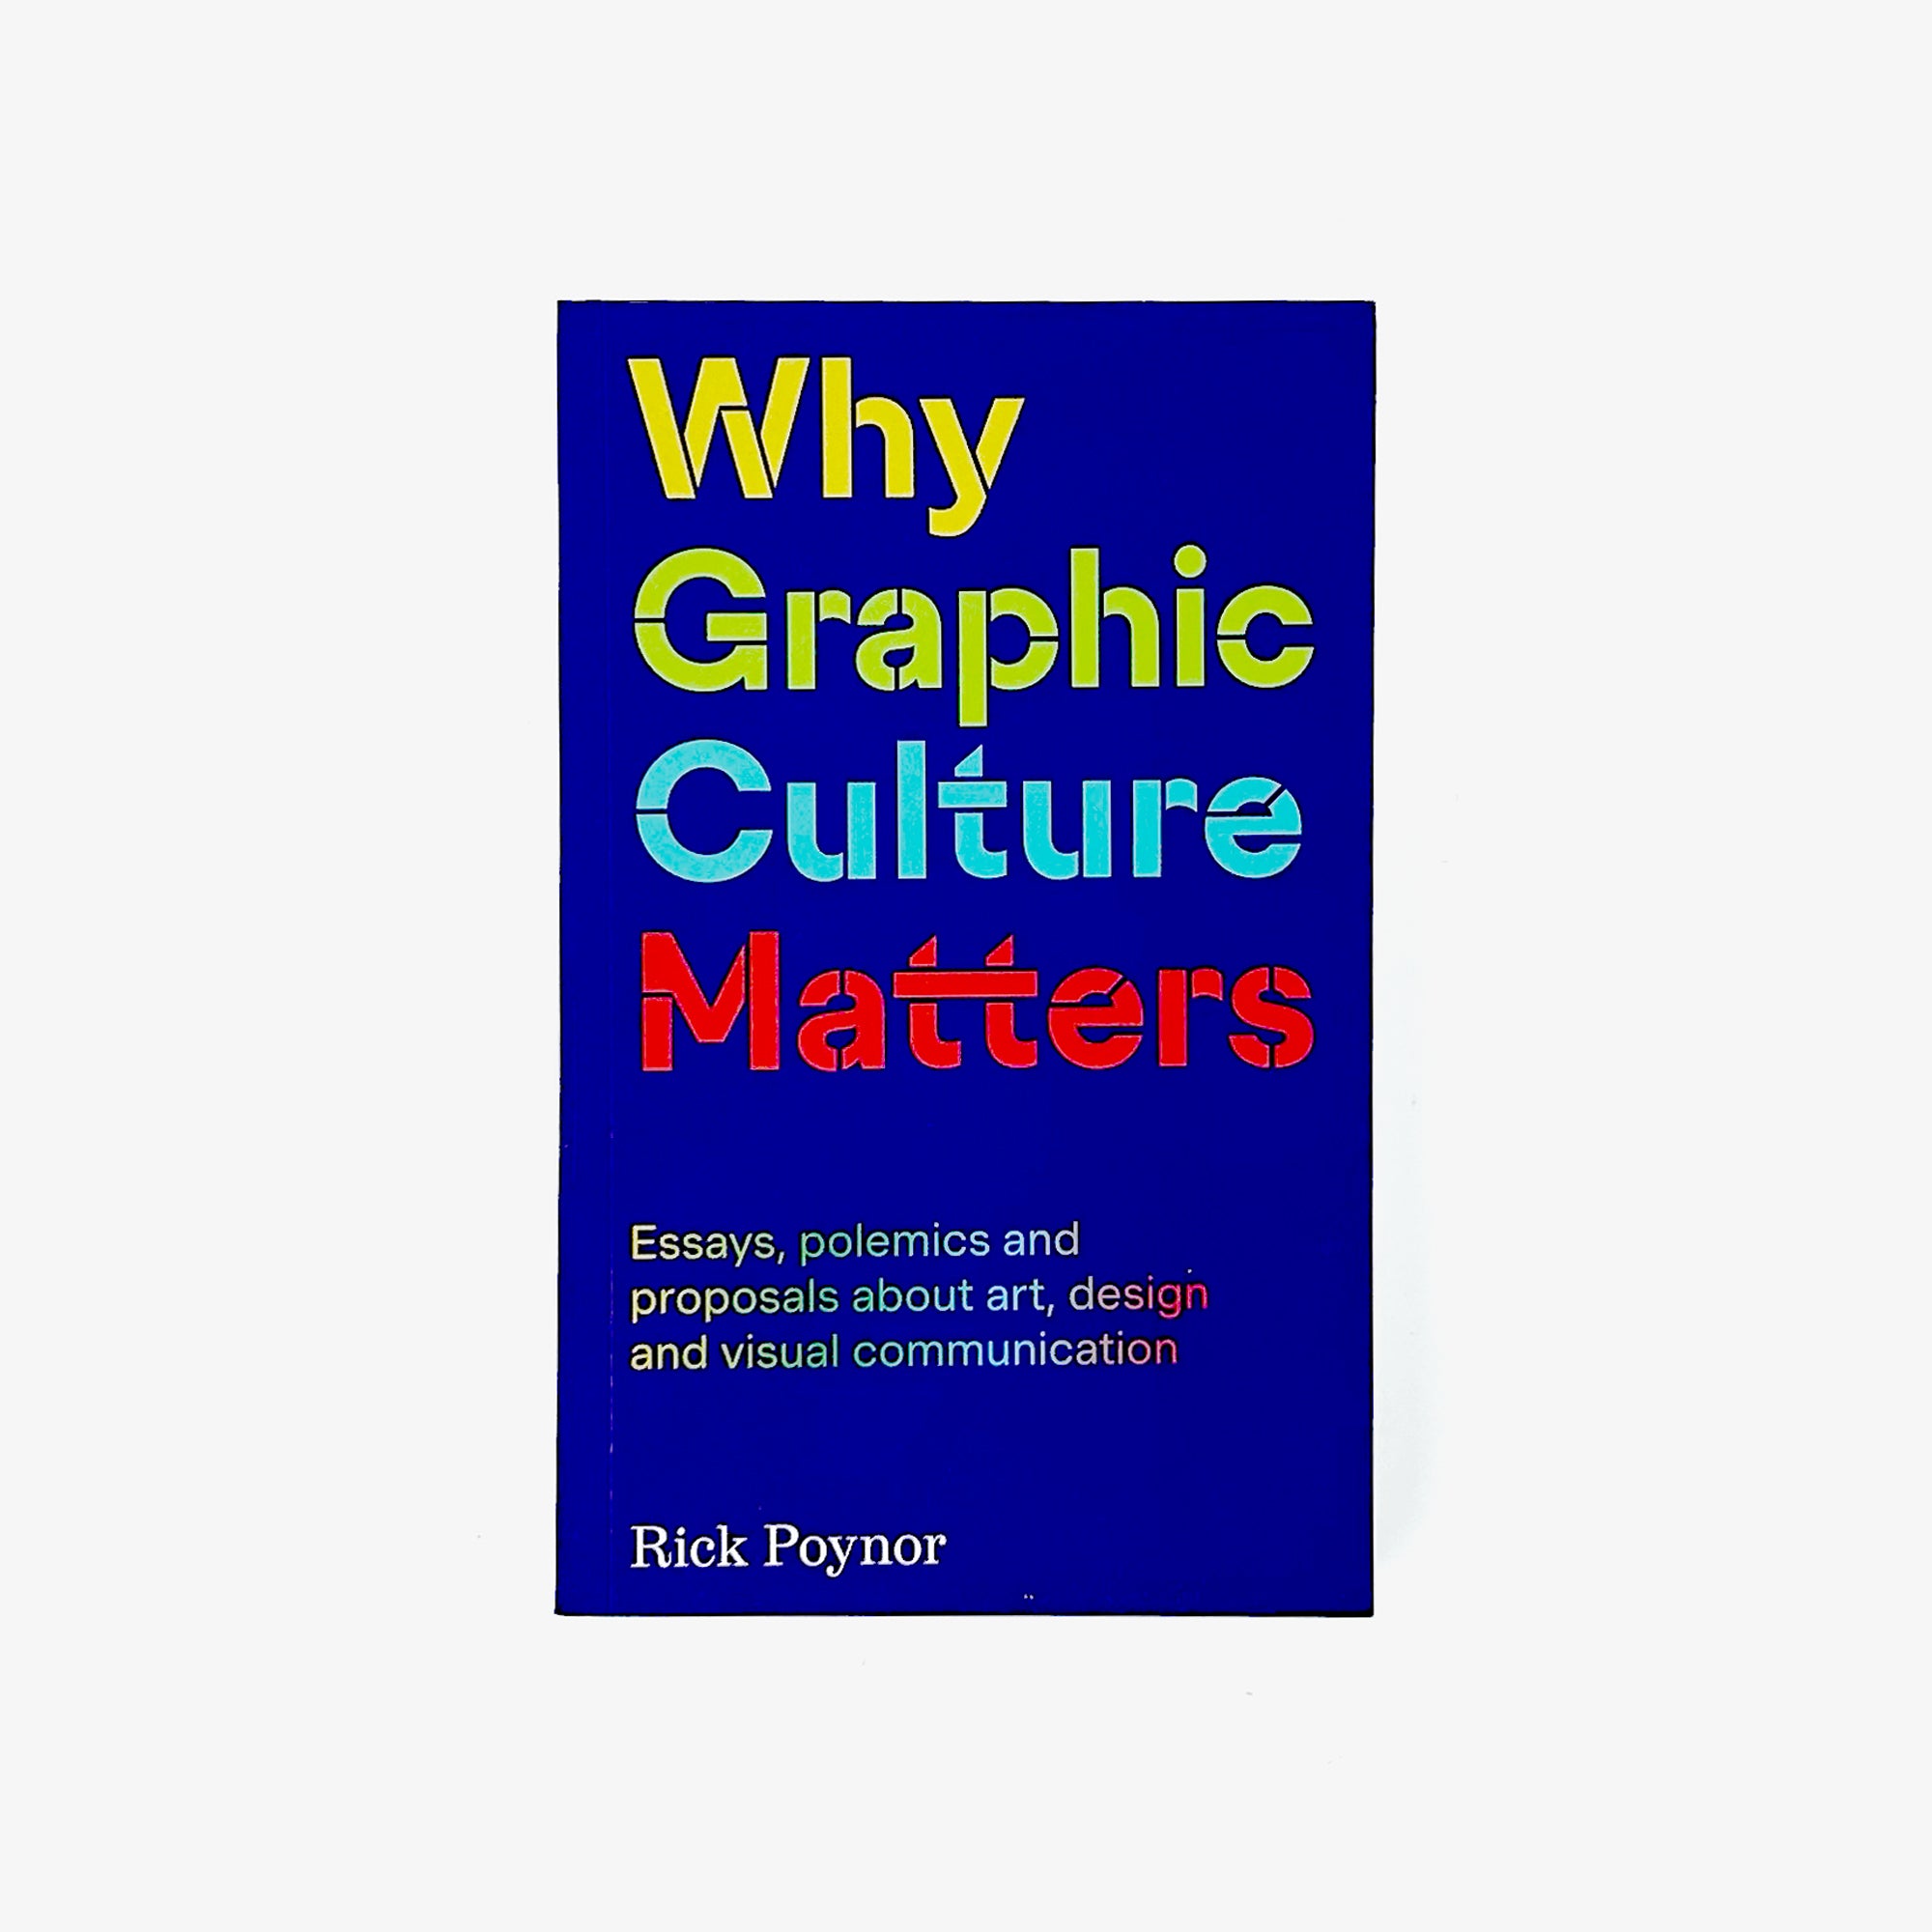 Why Graphic Culture Matters